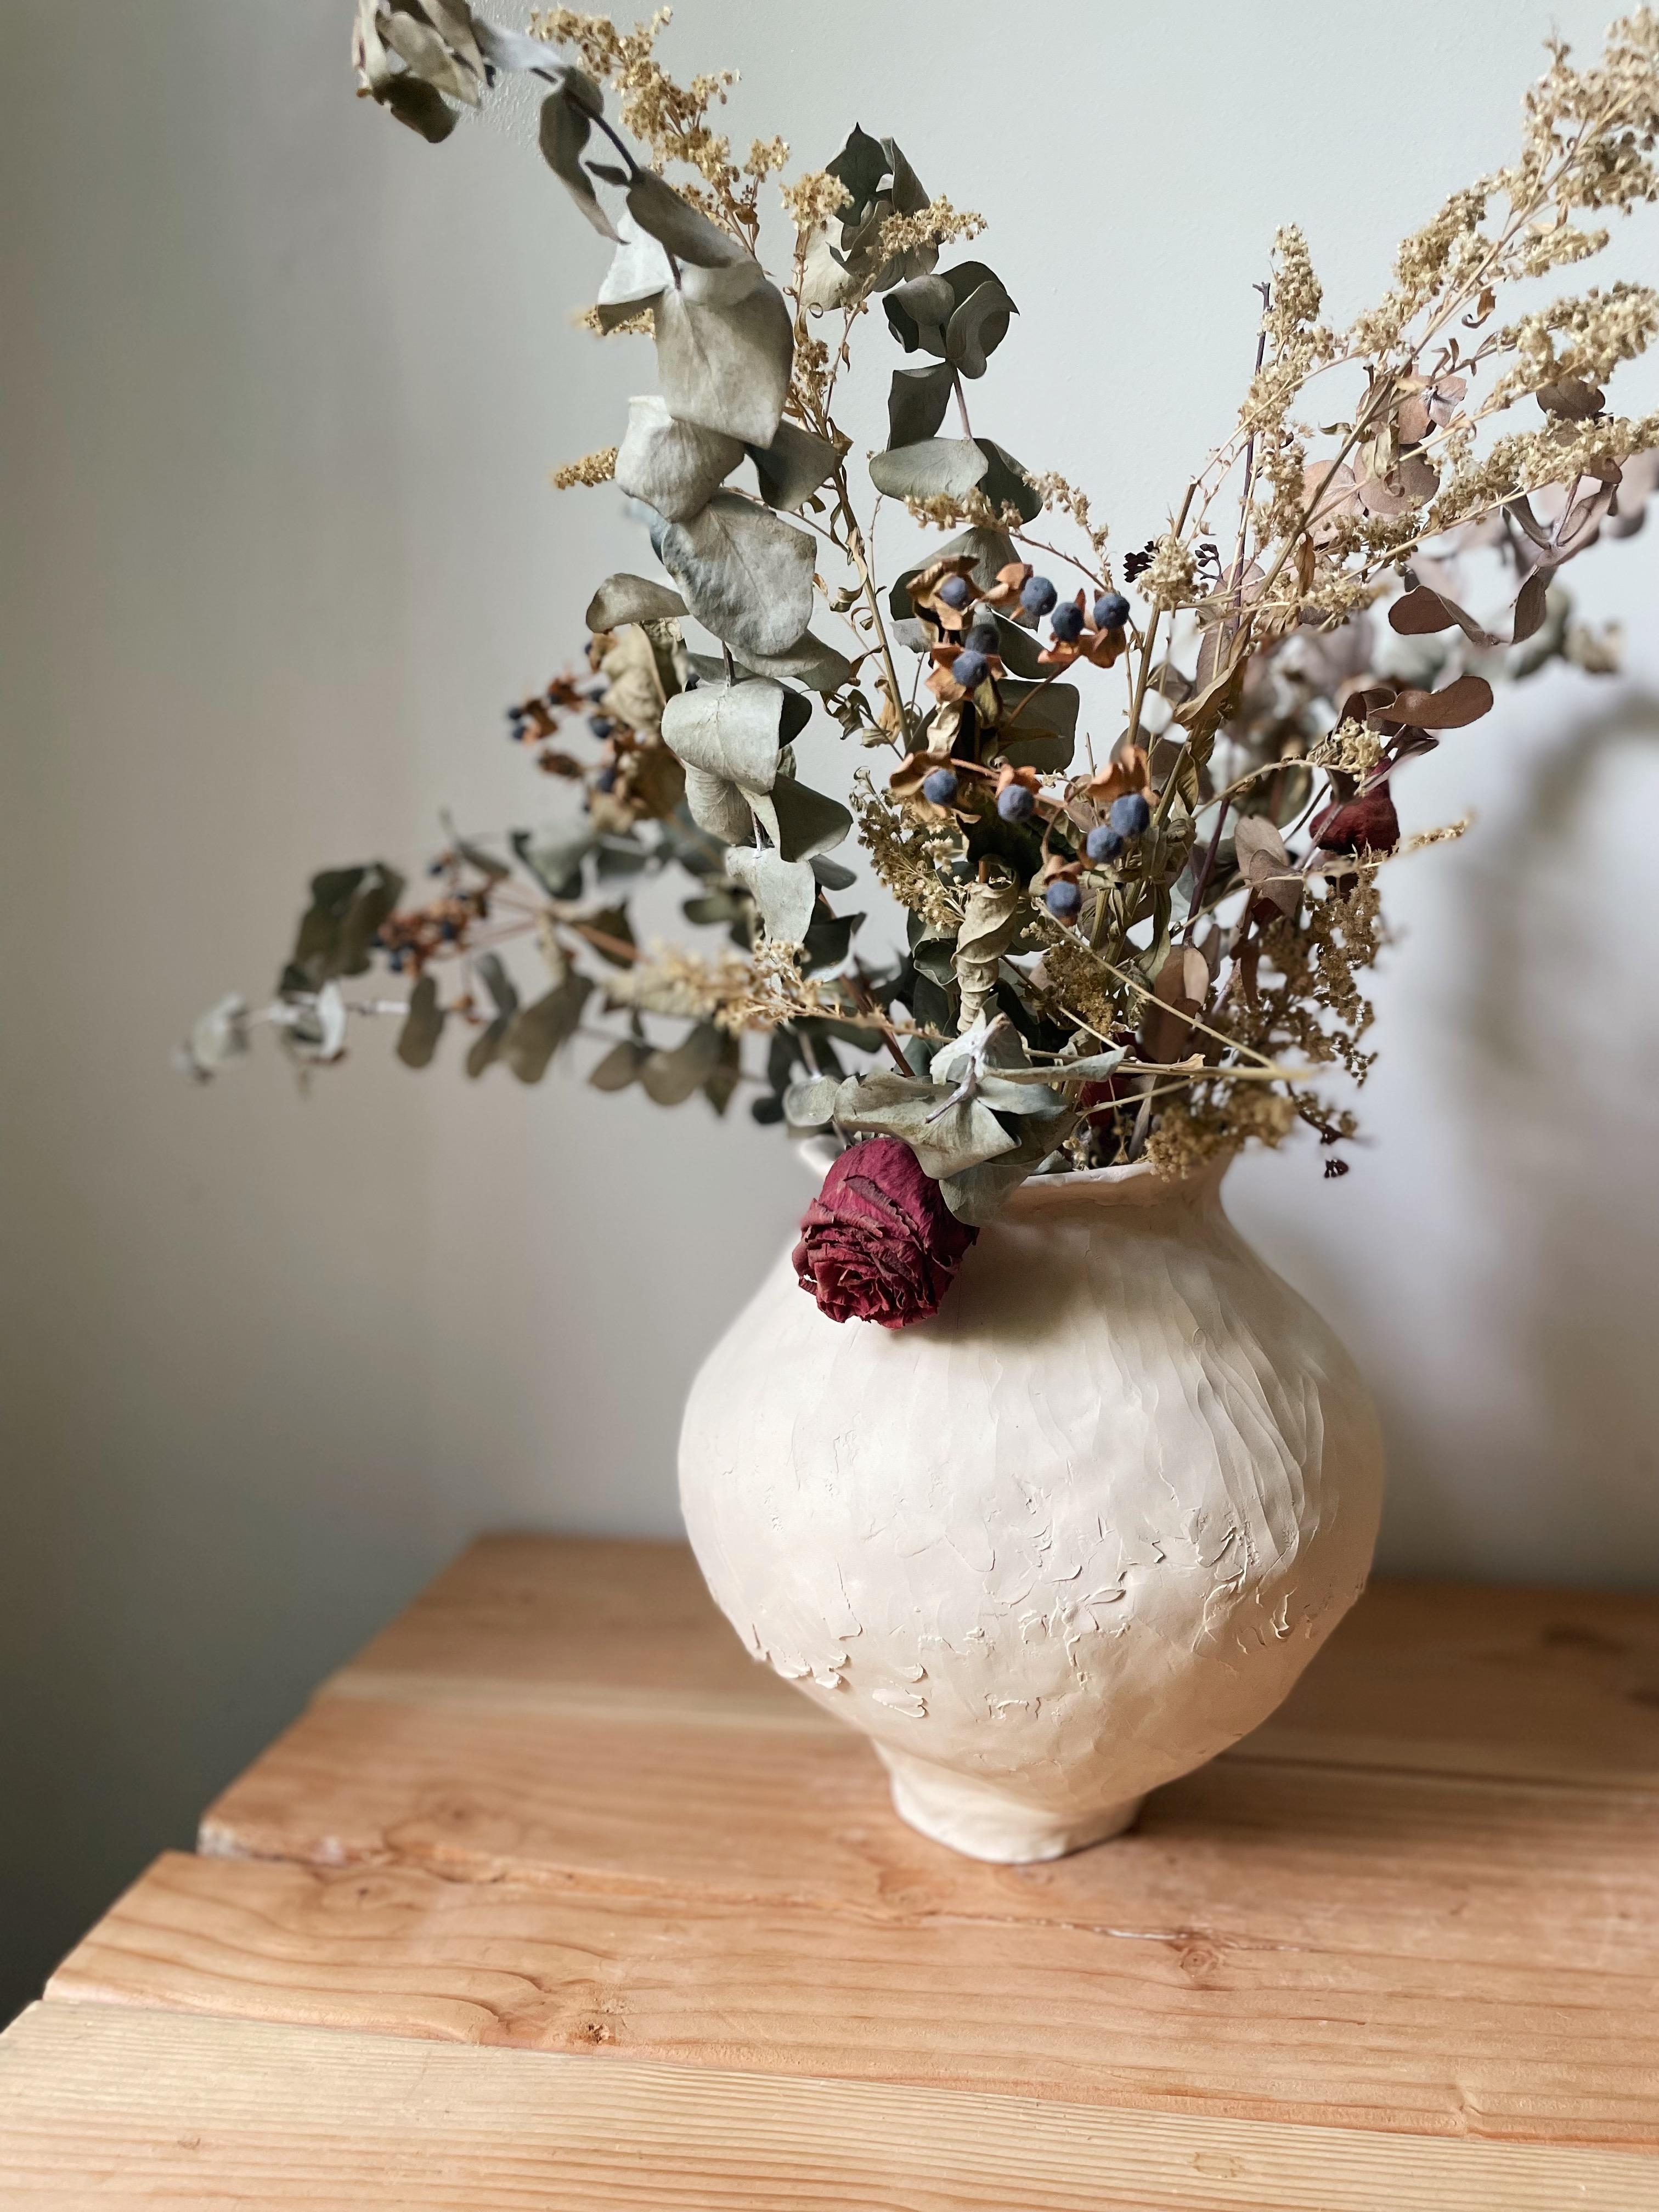 The Frai vessel was hand-built by taking bits of clay and smooshing them together, while shaping as the clay drys into its round form. Always accepting any imperfections along the way, this piece has a soft voice and works great in all settings. The